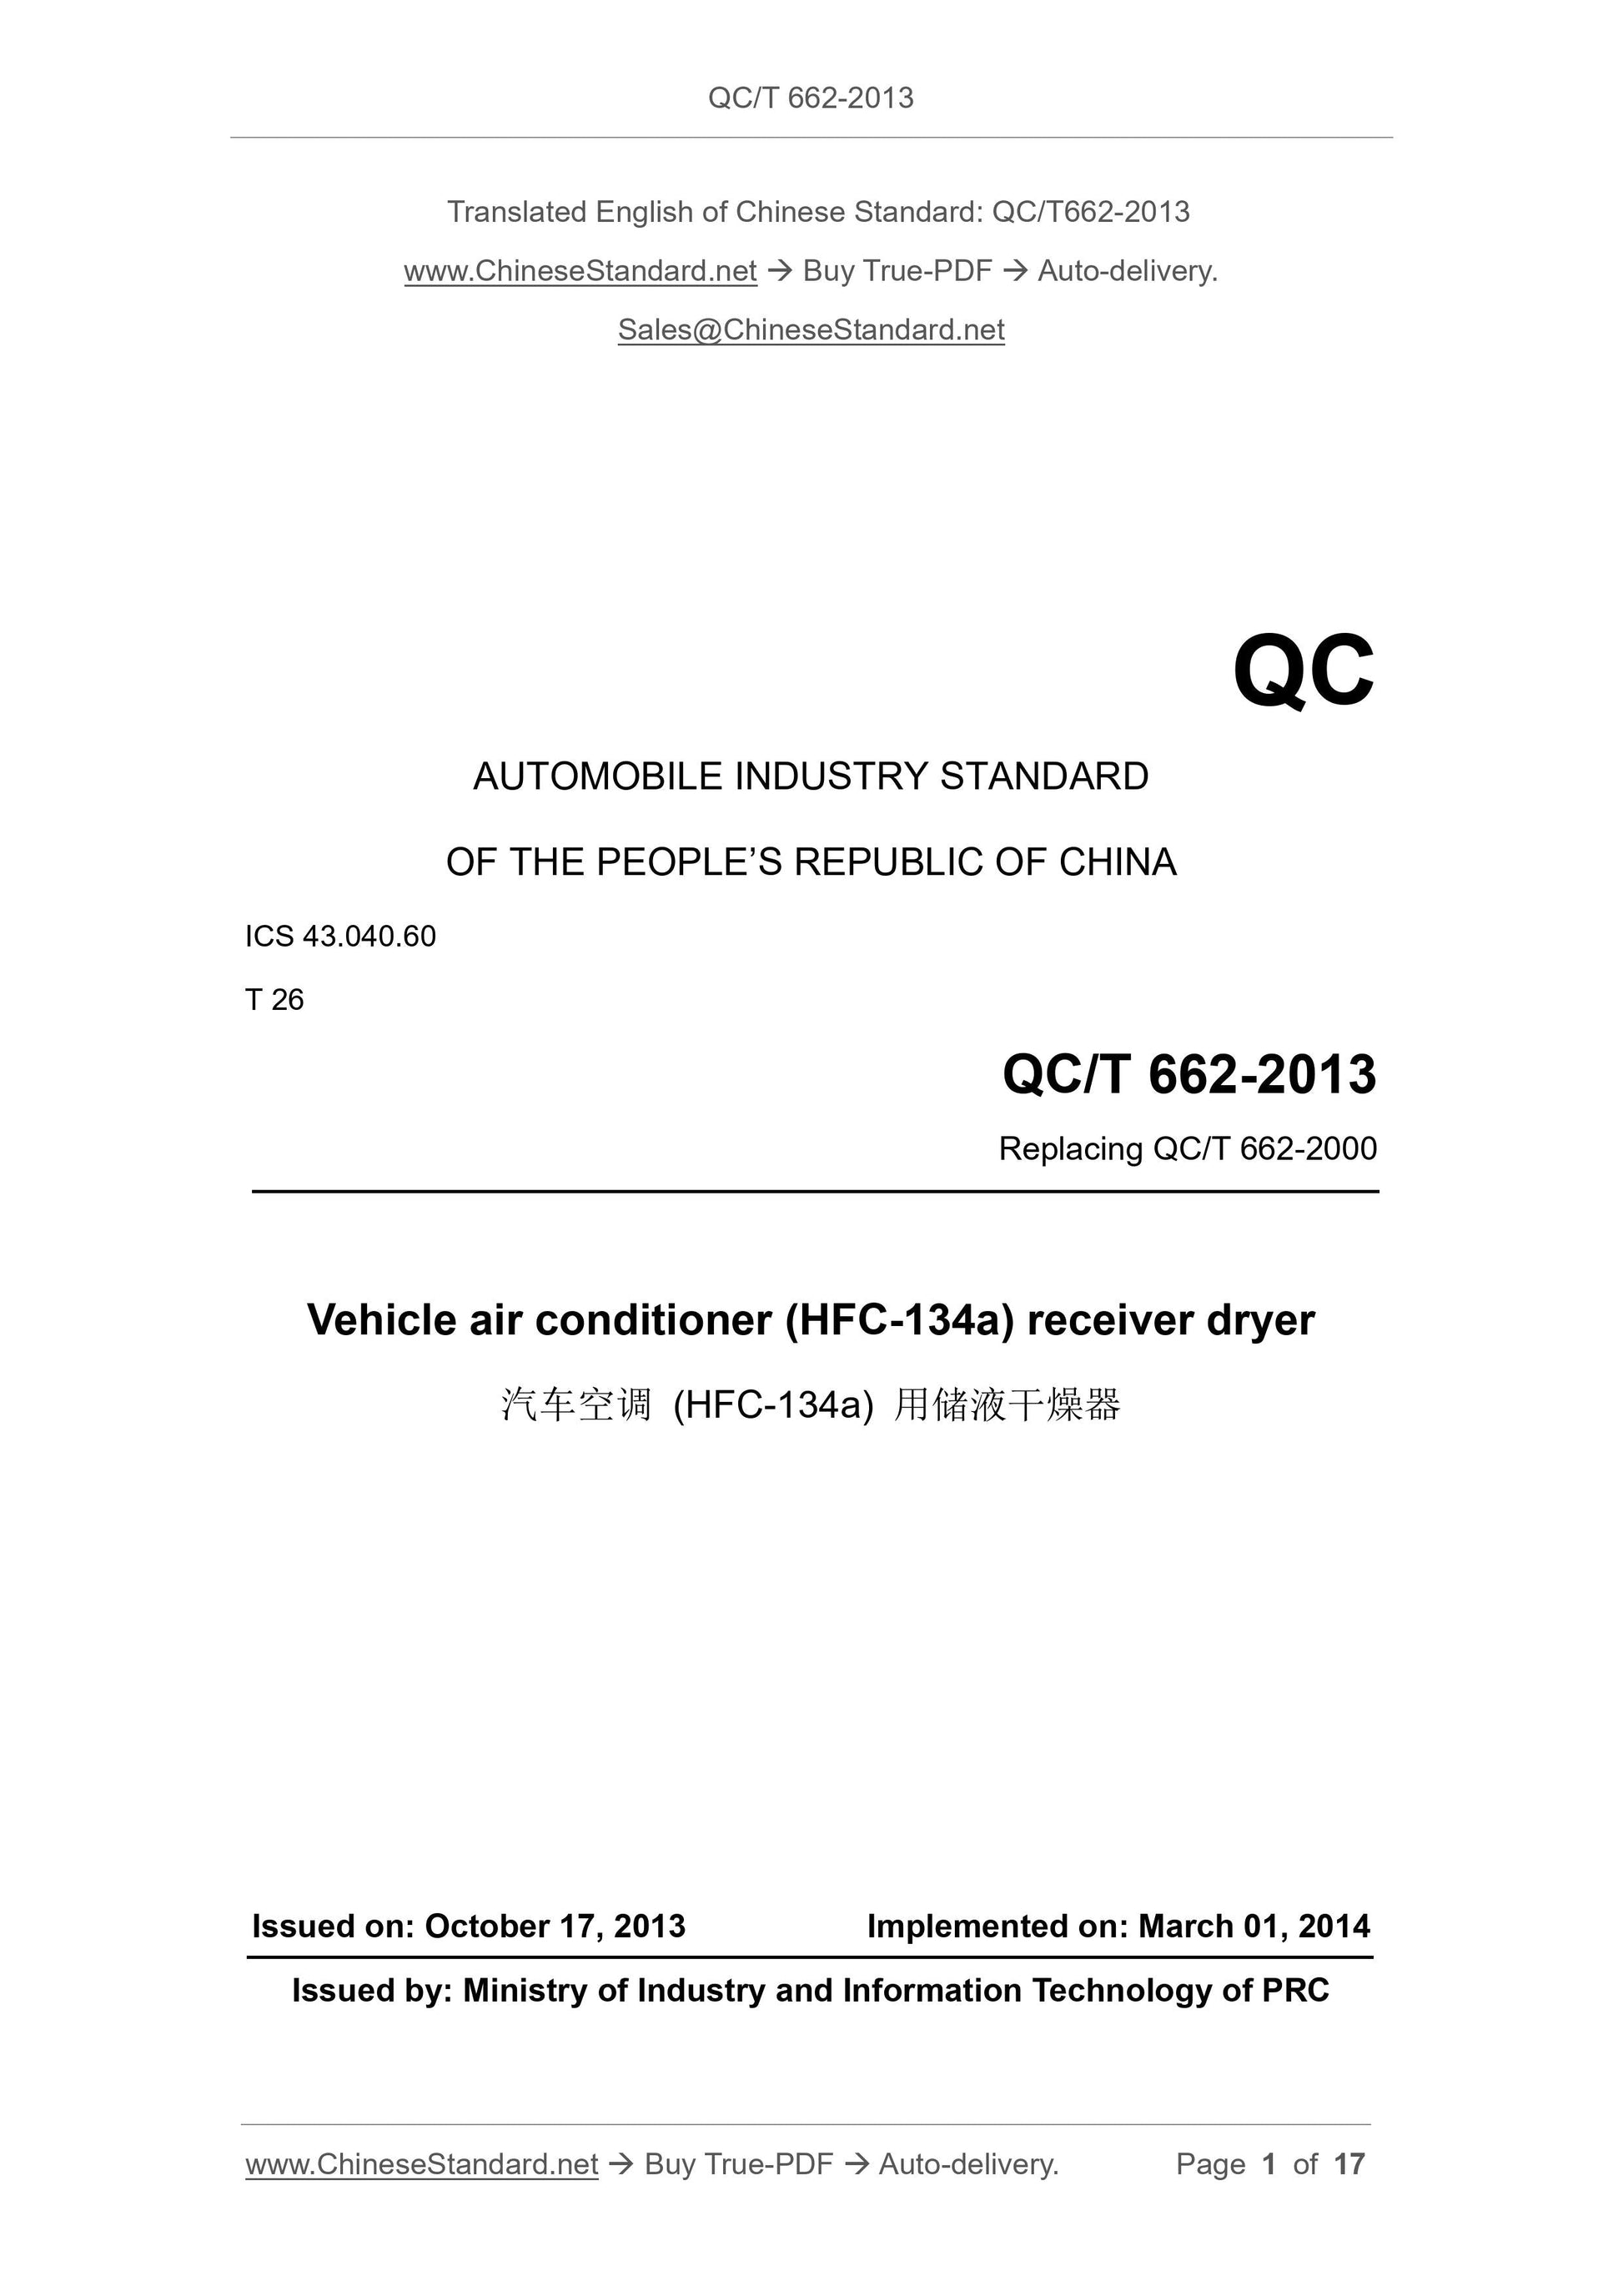 QC/T 662-2013 Page 1